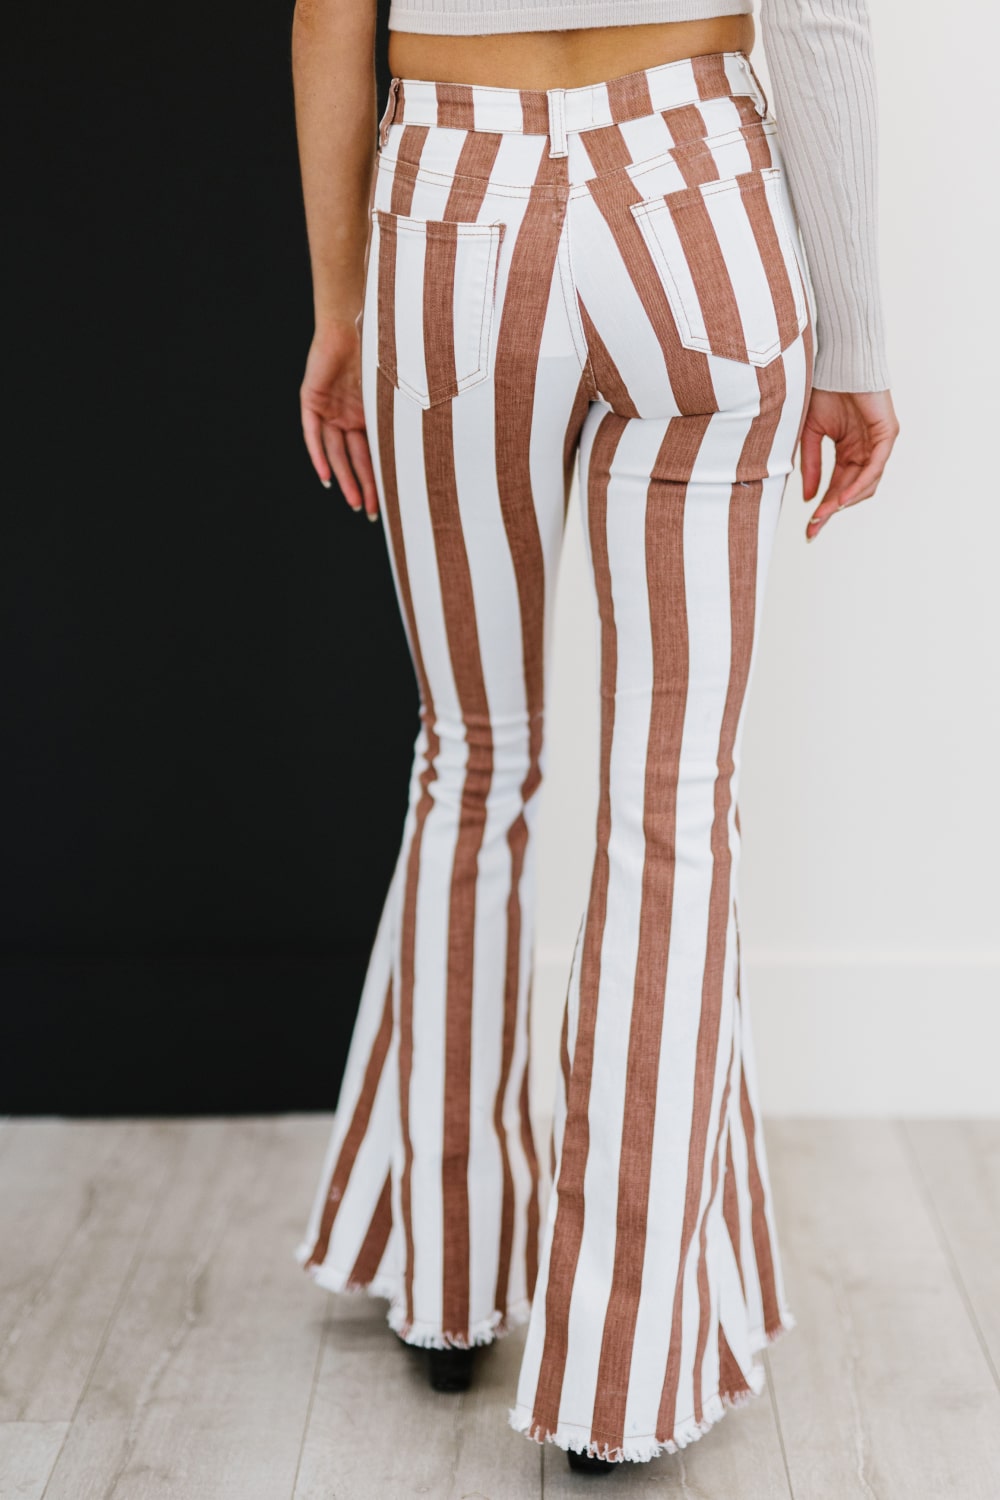 Show Stopper Striped Flare Pants